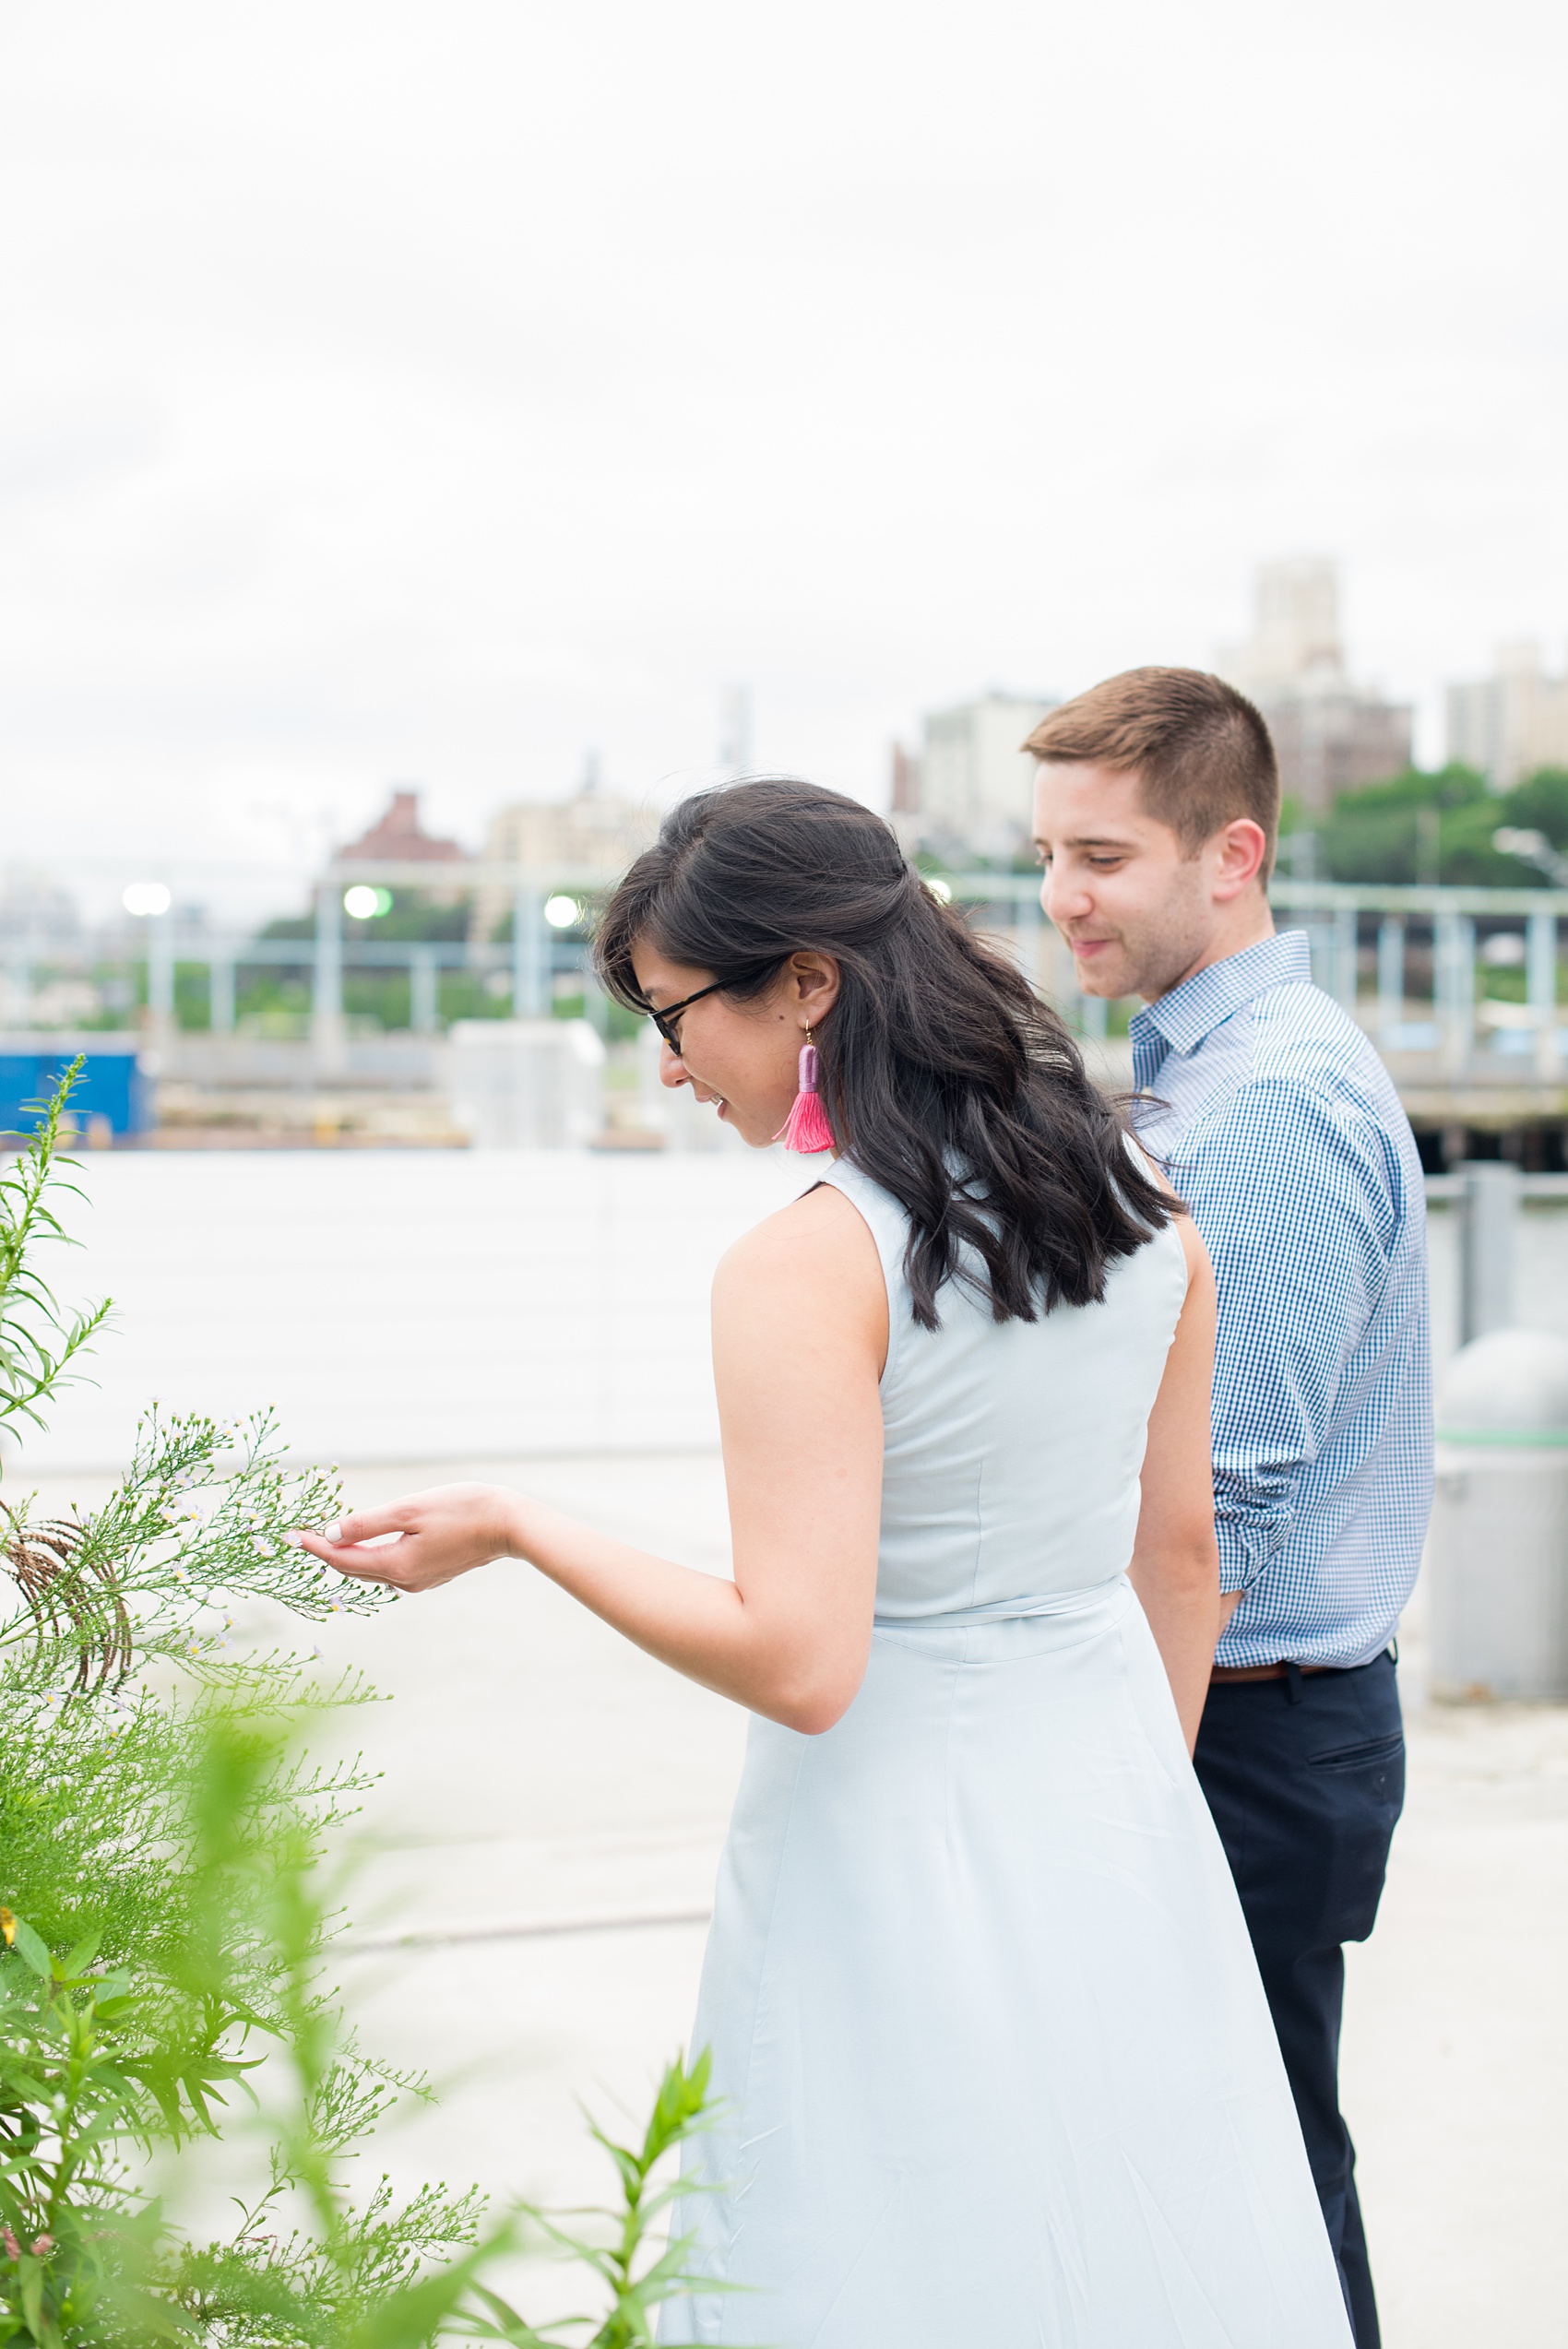 Brooklyn engagement photos by Mikkel Paige Photography. These beautiful, love-filled images in the park overlook bridges, the Manhattan skyline and waterfront on Piers 5 and 6. They'll provide inspiration from the bride and groom for outfits, romantic picture ideas and all around feel-good smiles! Click through to see their complete session post! #mikkelpaige #NYCweddingphotographer #NYCengagementsession #brooklynengagementphotos #engagementphotosinBrooklyn #BrooklynBridgePark #BrooklynPiers #ManhattanSkyline #BrooklynBridge #cityengagementphotos